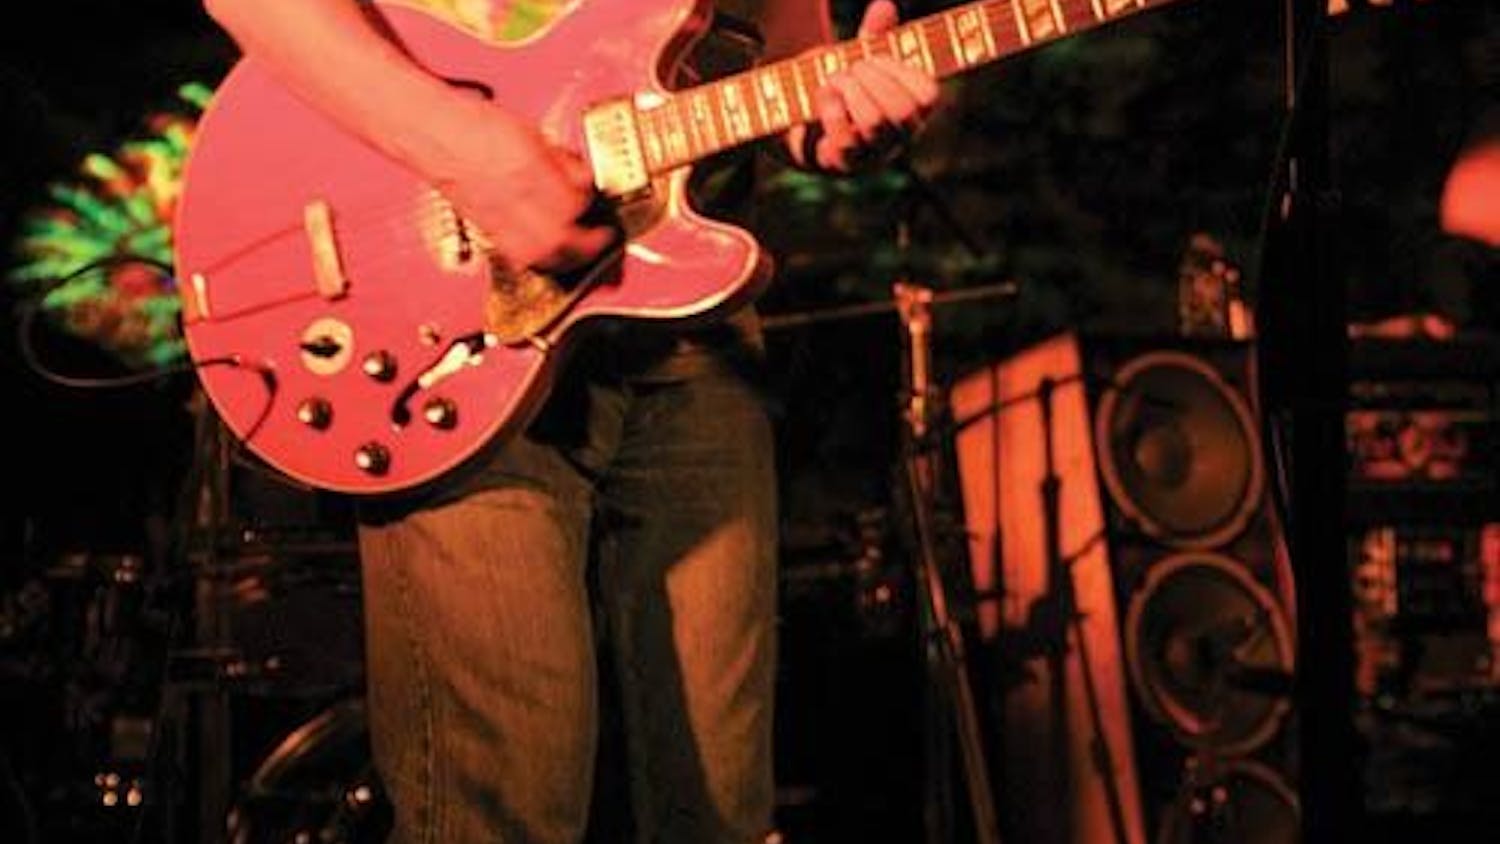 Rob Eaton, guitarist and vocalist for the Dark Star Orchestra, performs Sunday night at the Bluebird. The band recreates song for song classic Grateful Dead performances for a new generation of "Deadheads".